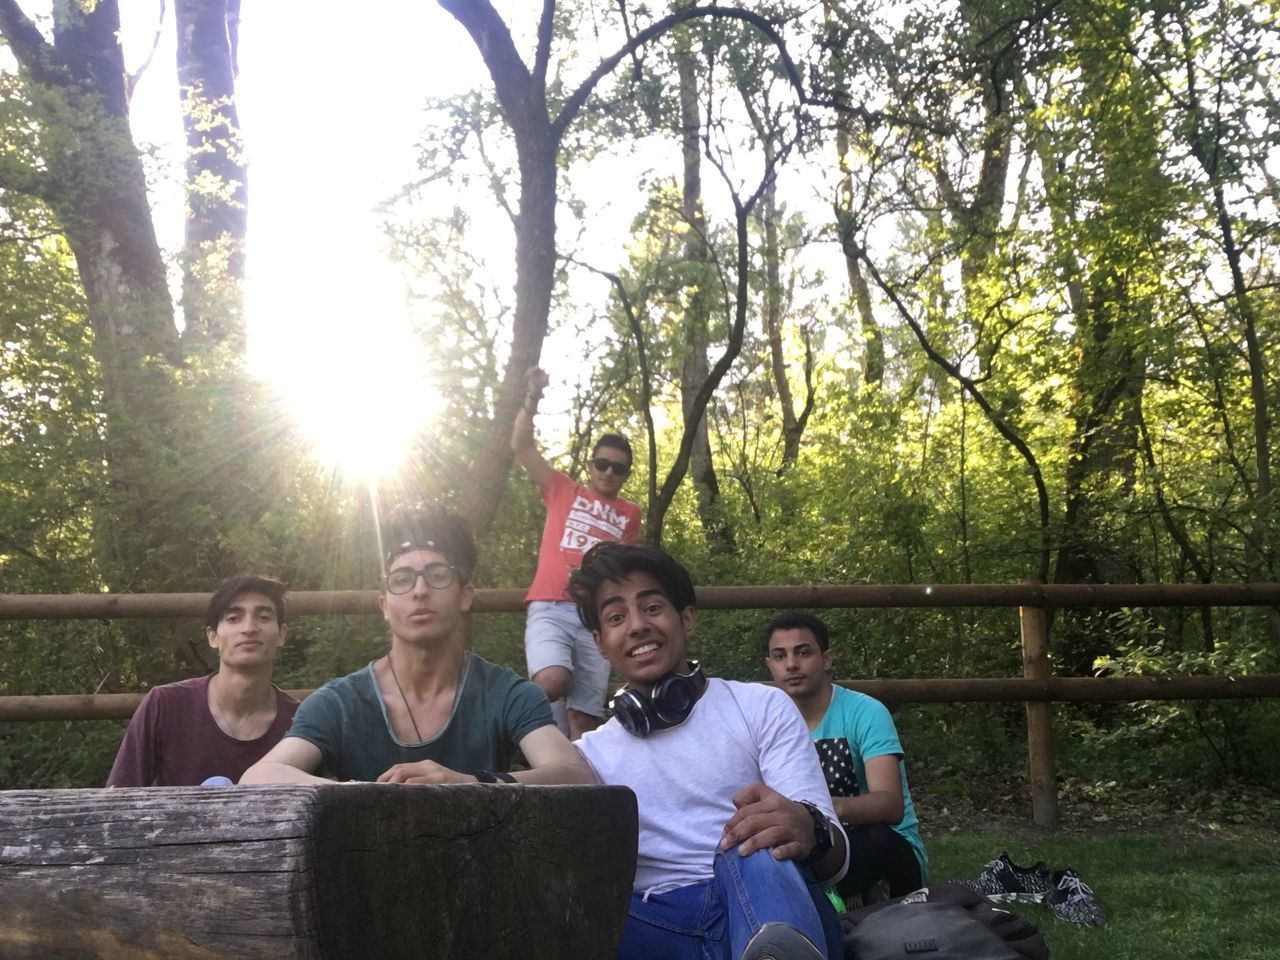 lifestyles, togetherness, leisure activity, bonding, person, love, casual clothing, young adult, smiling, happiness, childhood, friendship, family, portrait, boys, looking at camera, young men, tree